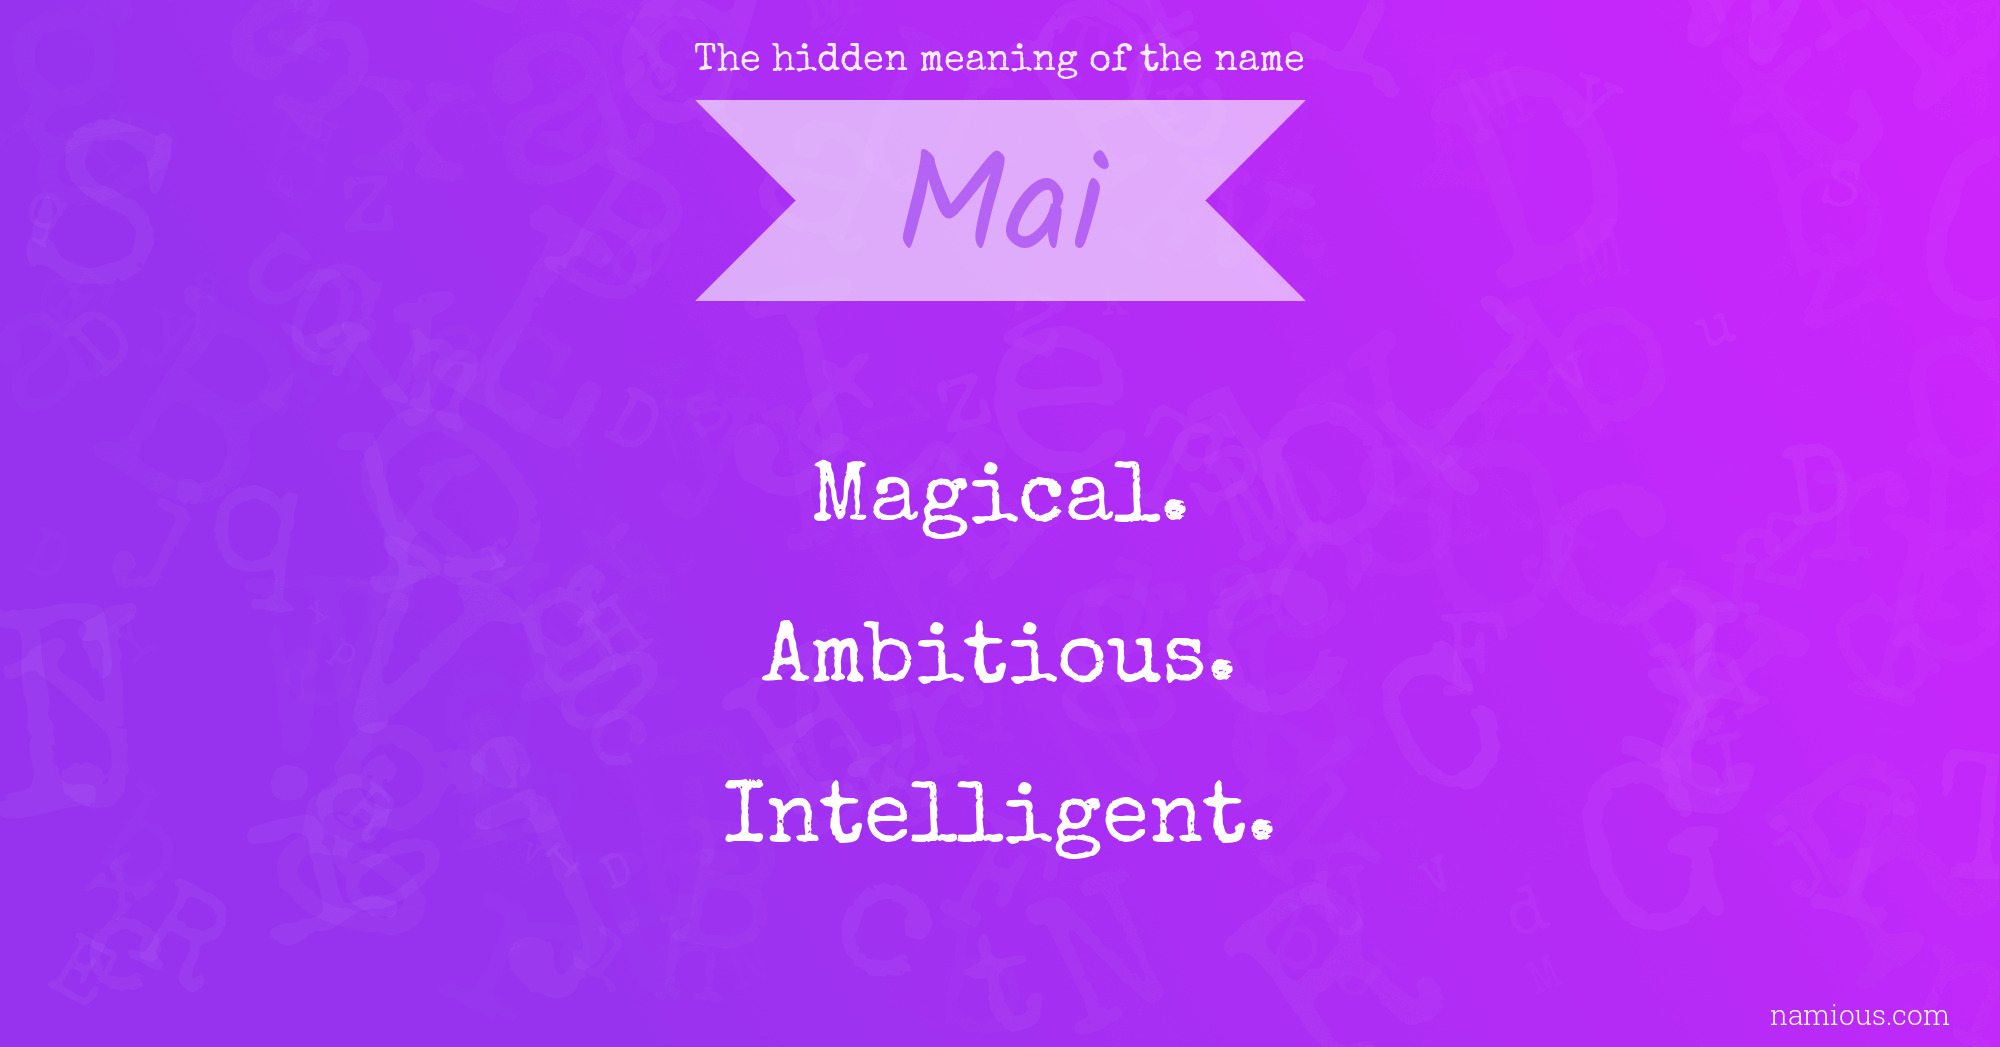 The hidden meaning of the name Mai